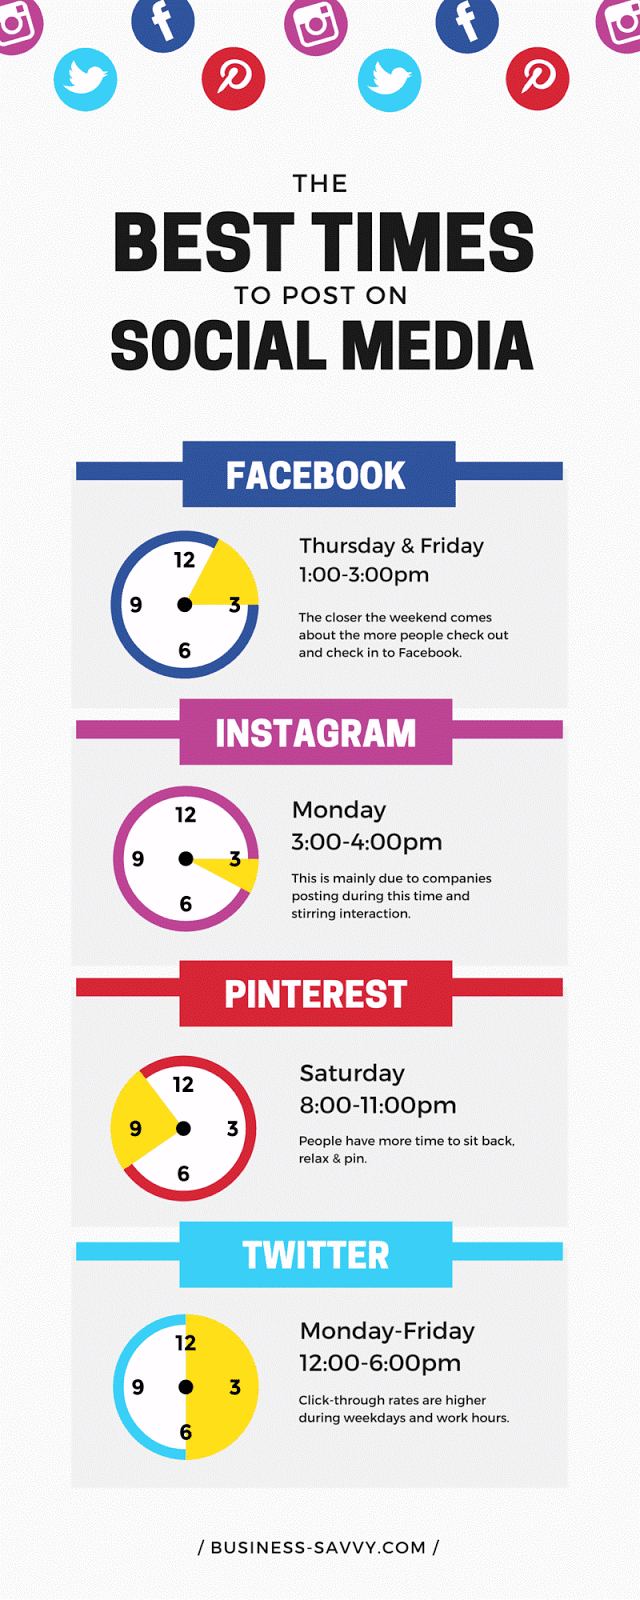 BEST TIMES TO POST ON SOCIAL MEDIA (INFOGRAPHIC)